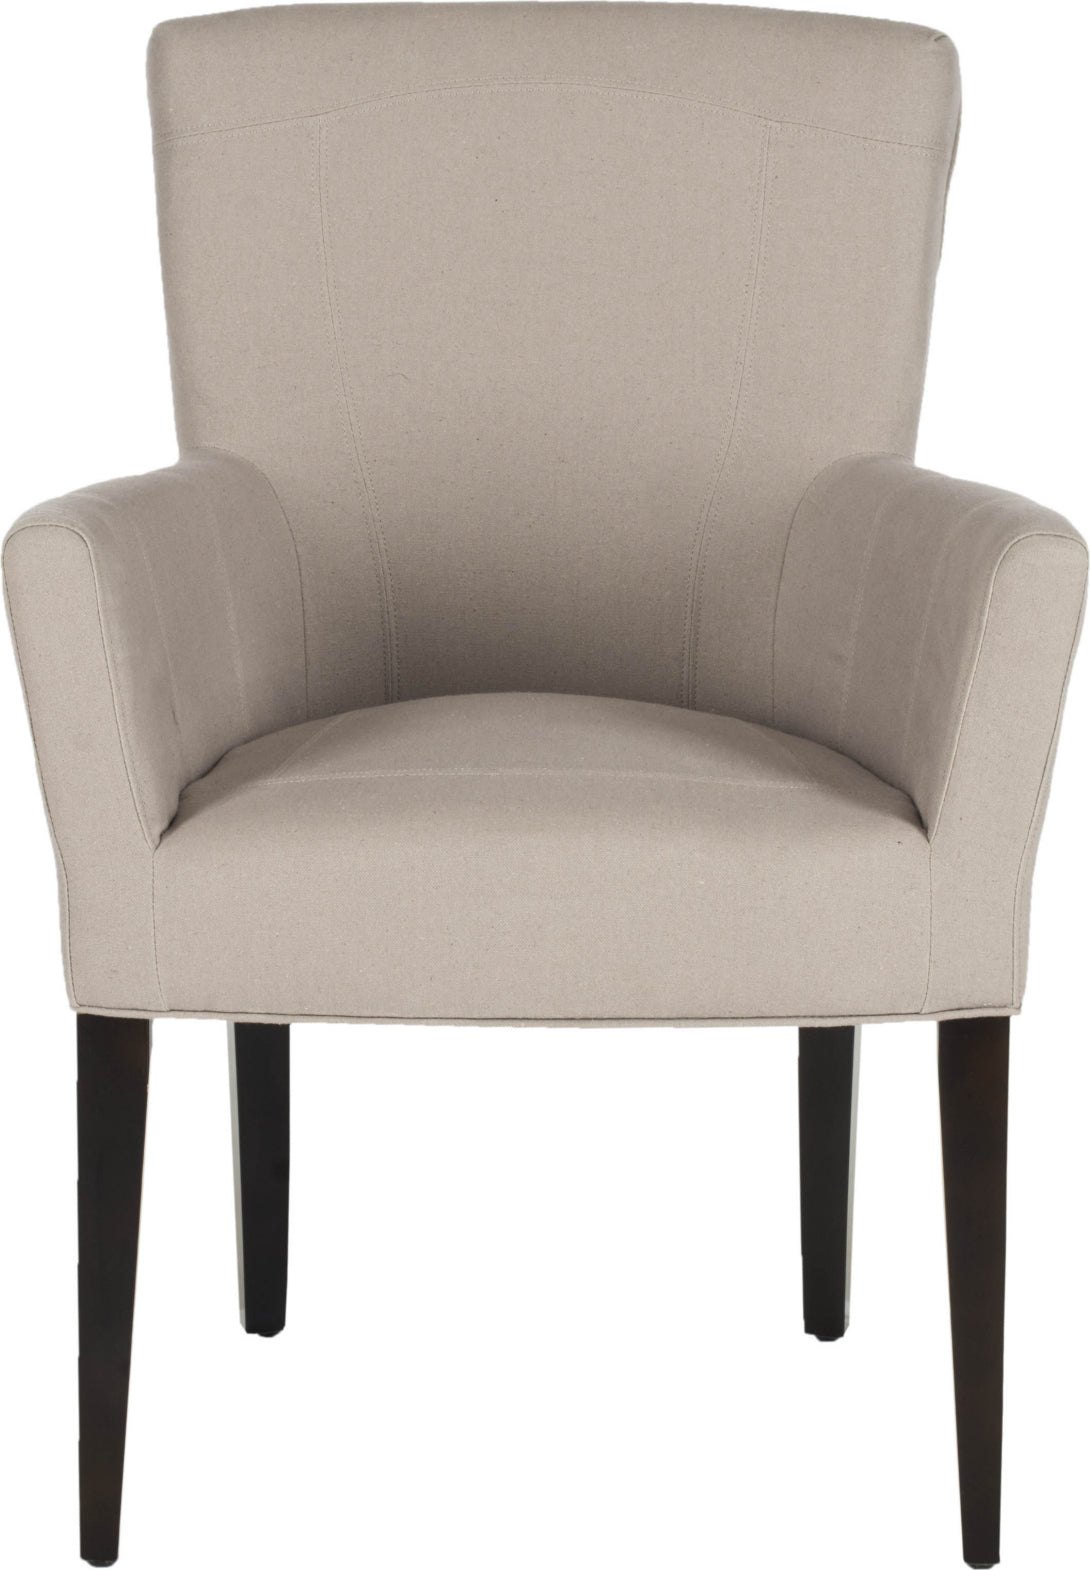 Safavieh Dale Arm Chair Taupe and Espresso Furniture main image